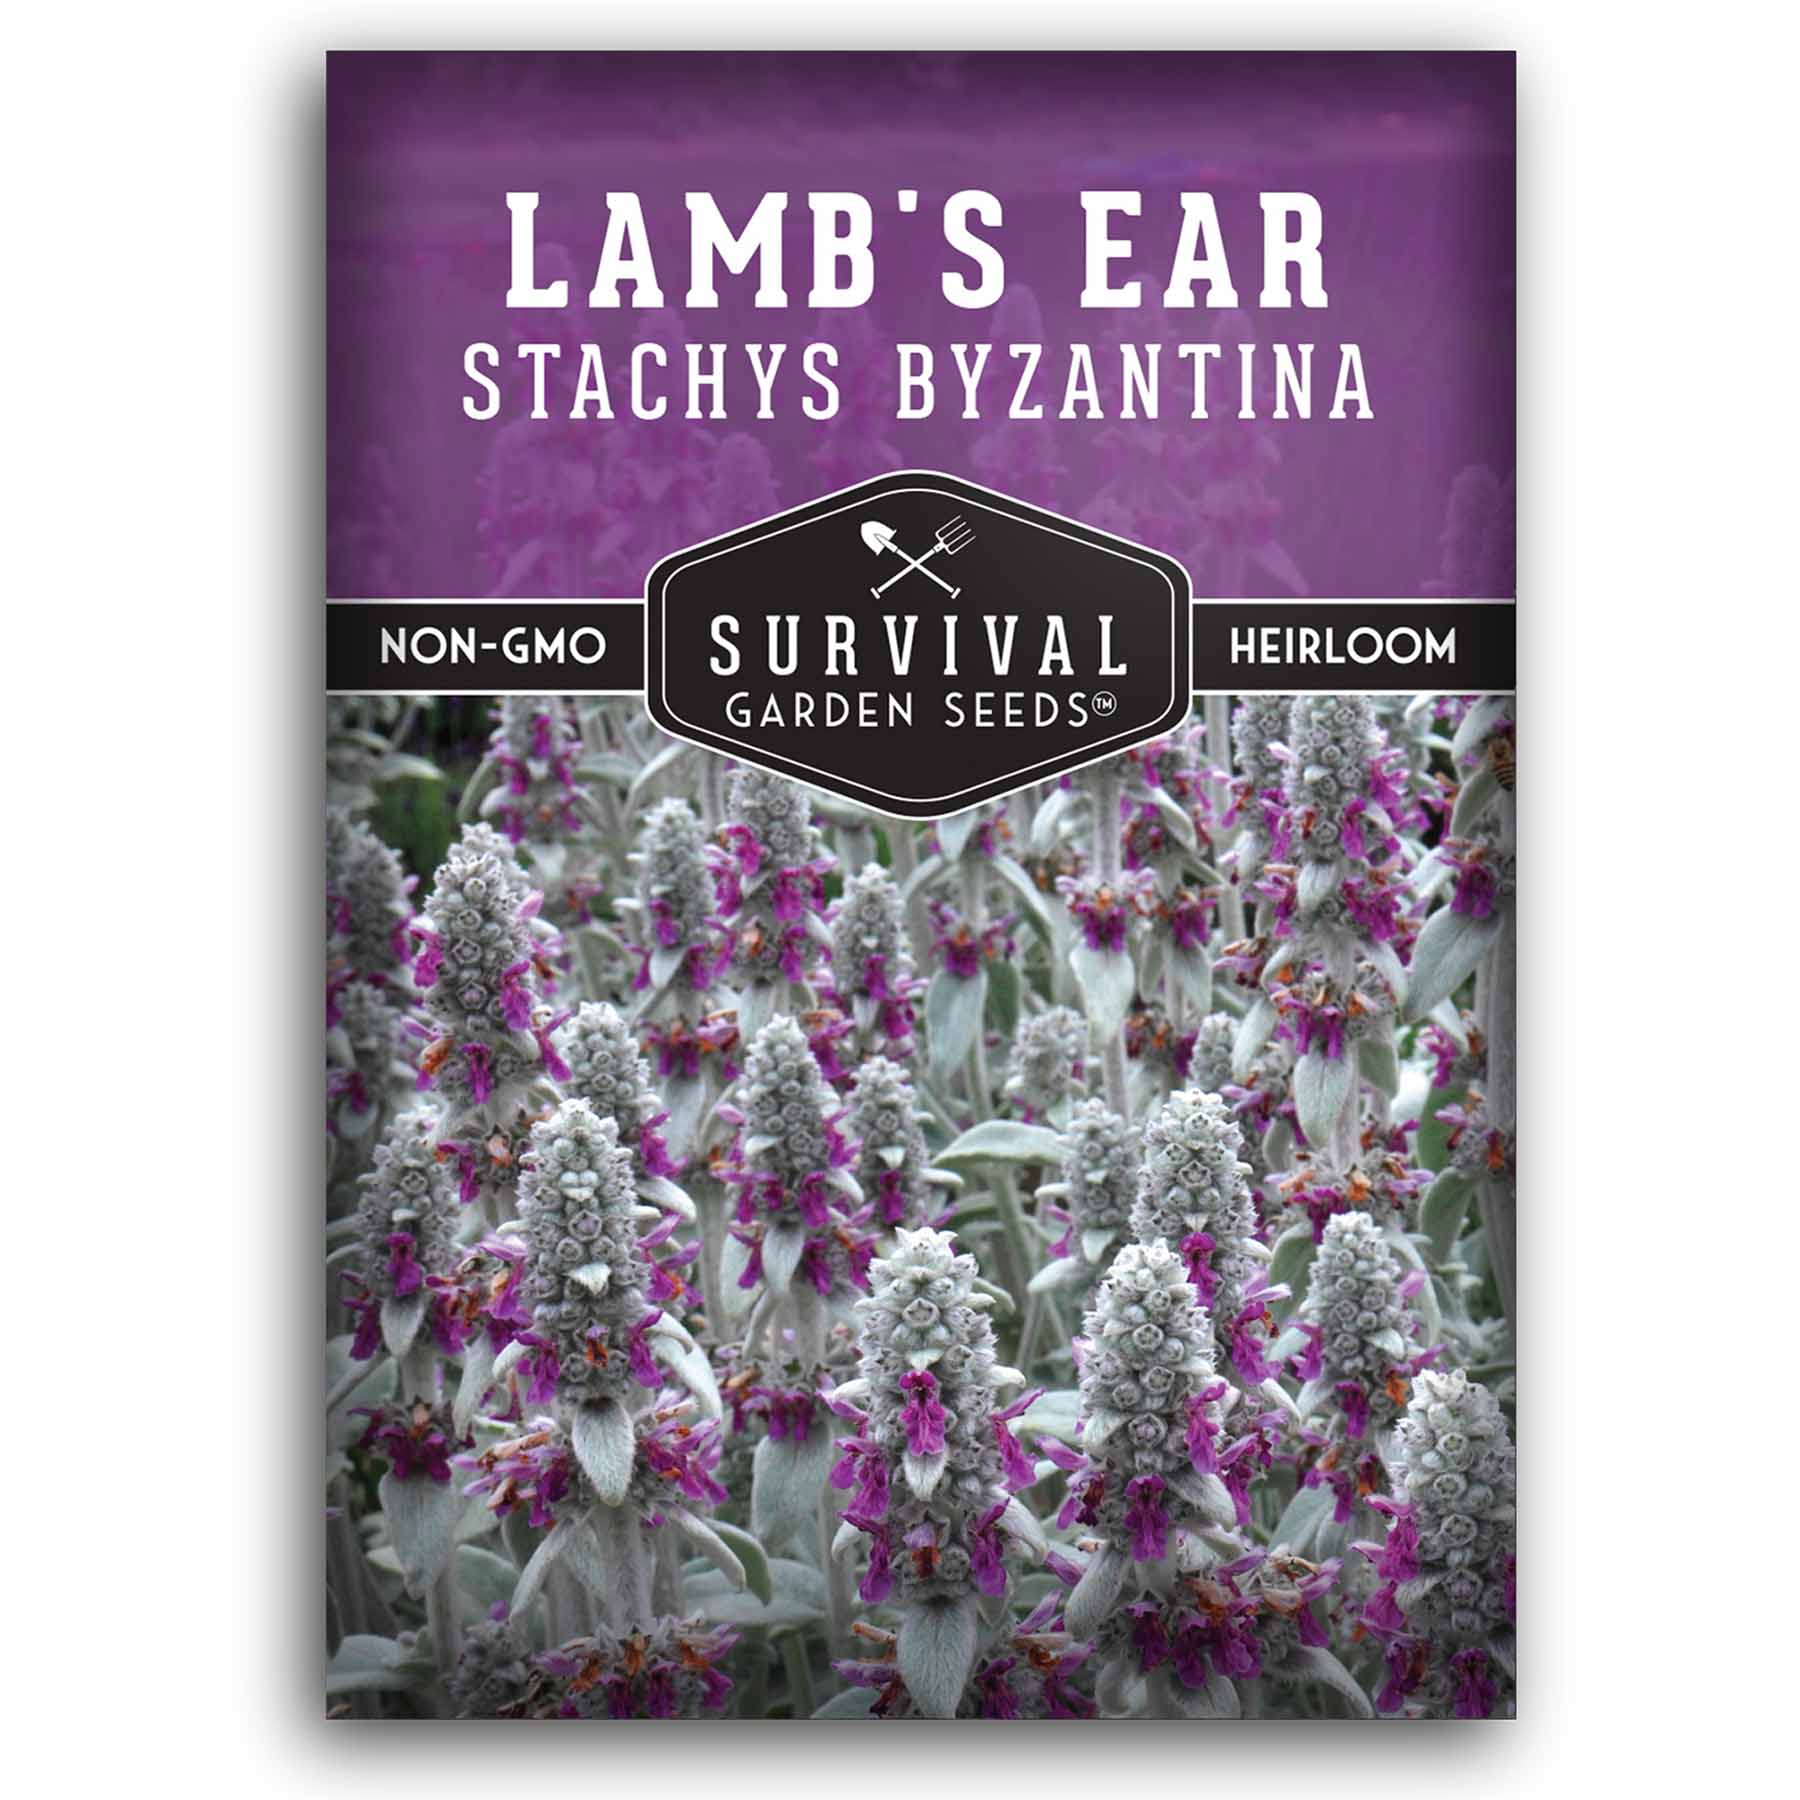 One packet of Lamb's Ear seeds